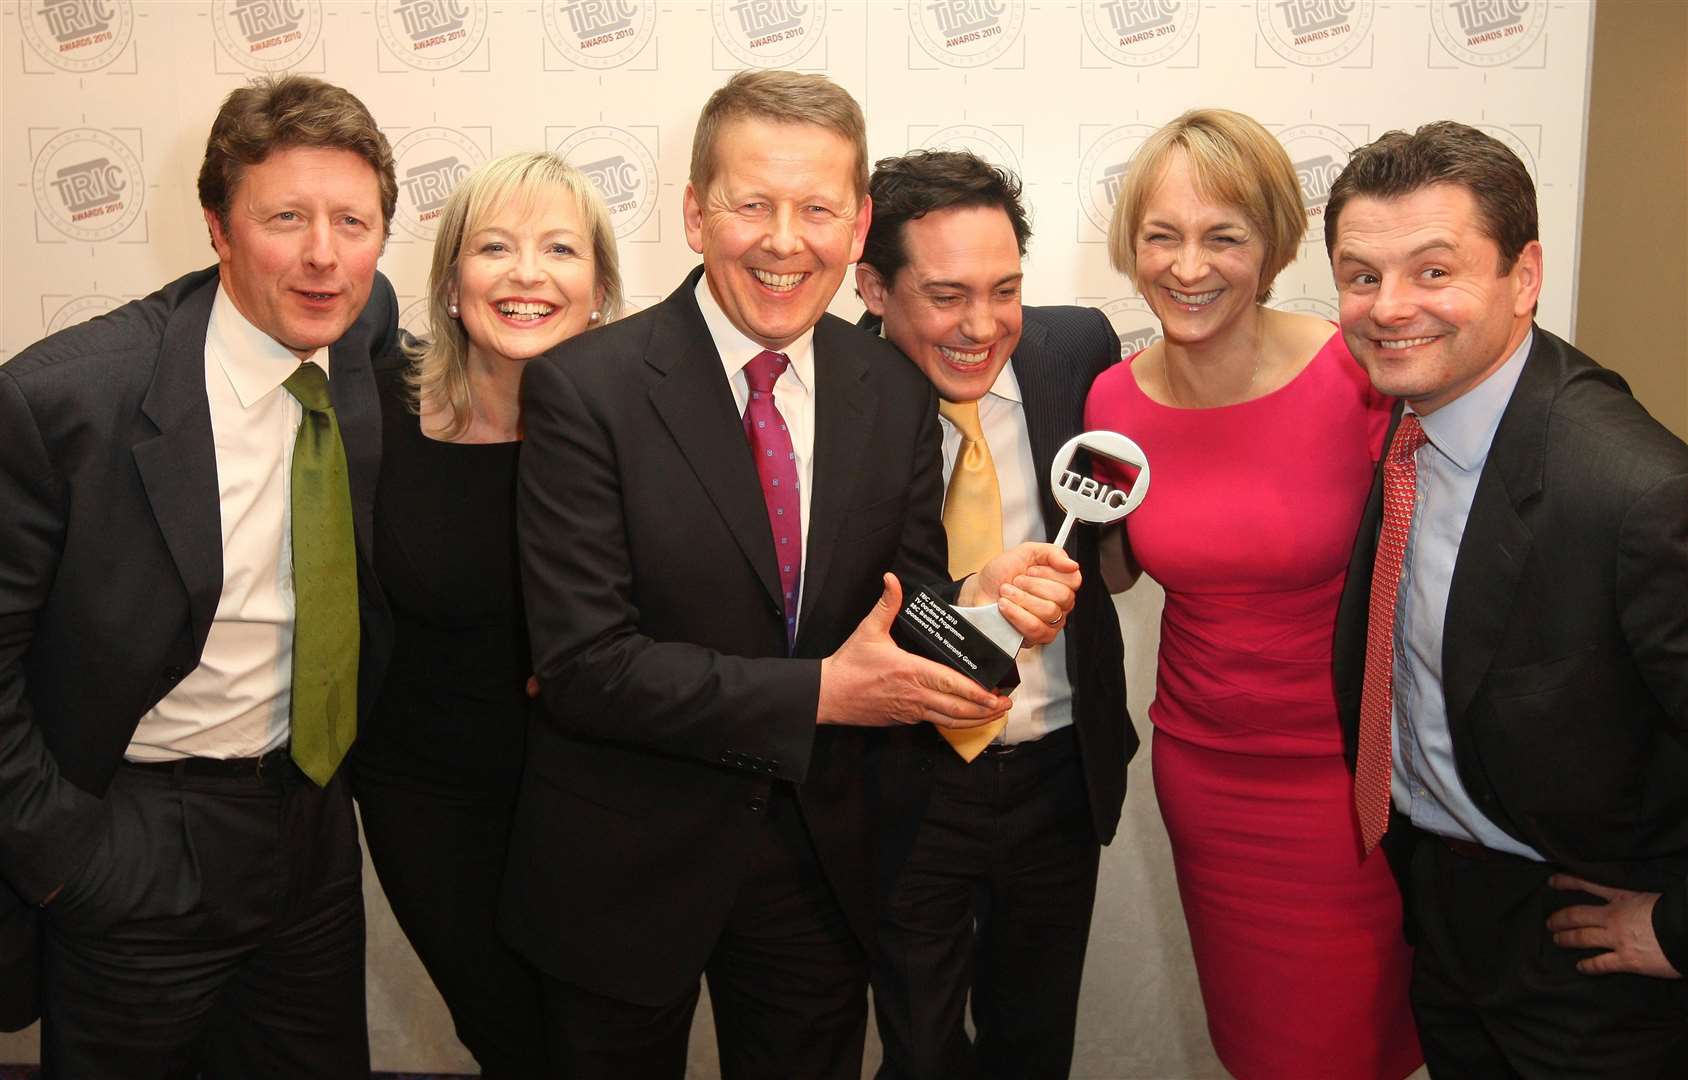 Charlie Stayt, Carol Kirkwood, Bill Turnbull, Simon Jack, Louise Minchin and Chris Hollins with the award for ‘Best TV Daytime Programme’ at the TRIC (Television and Radio Industries Club) Annual Awards in 2010 (Dominic Lipinski/PA)